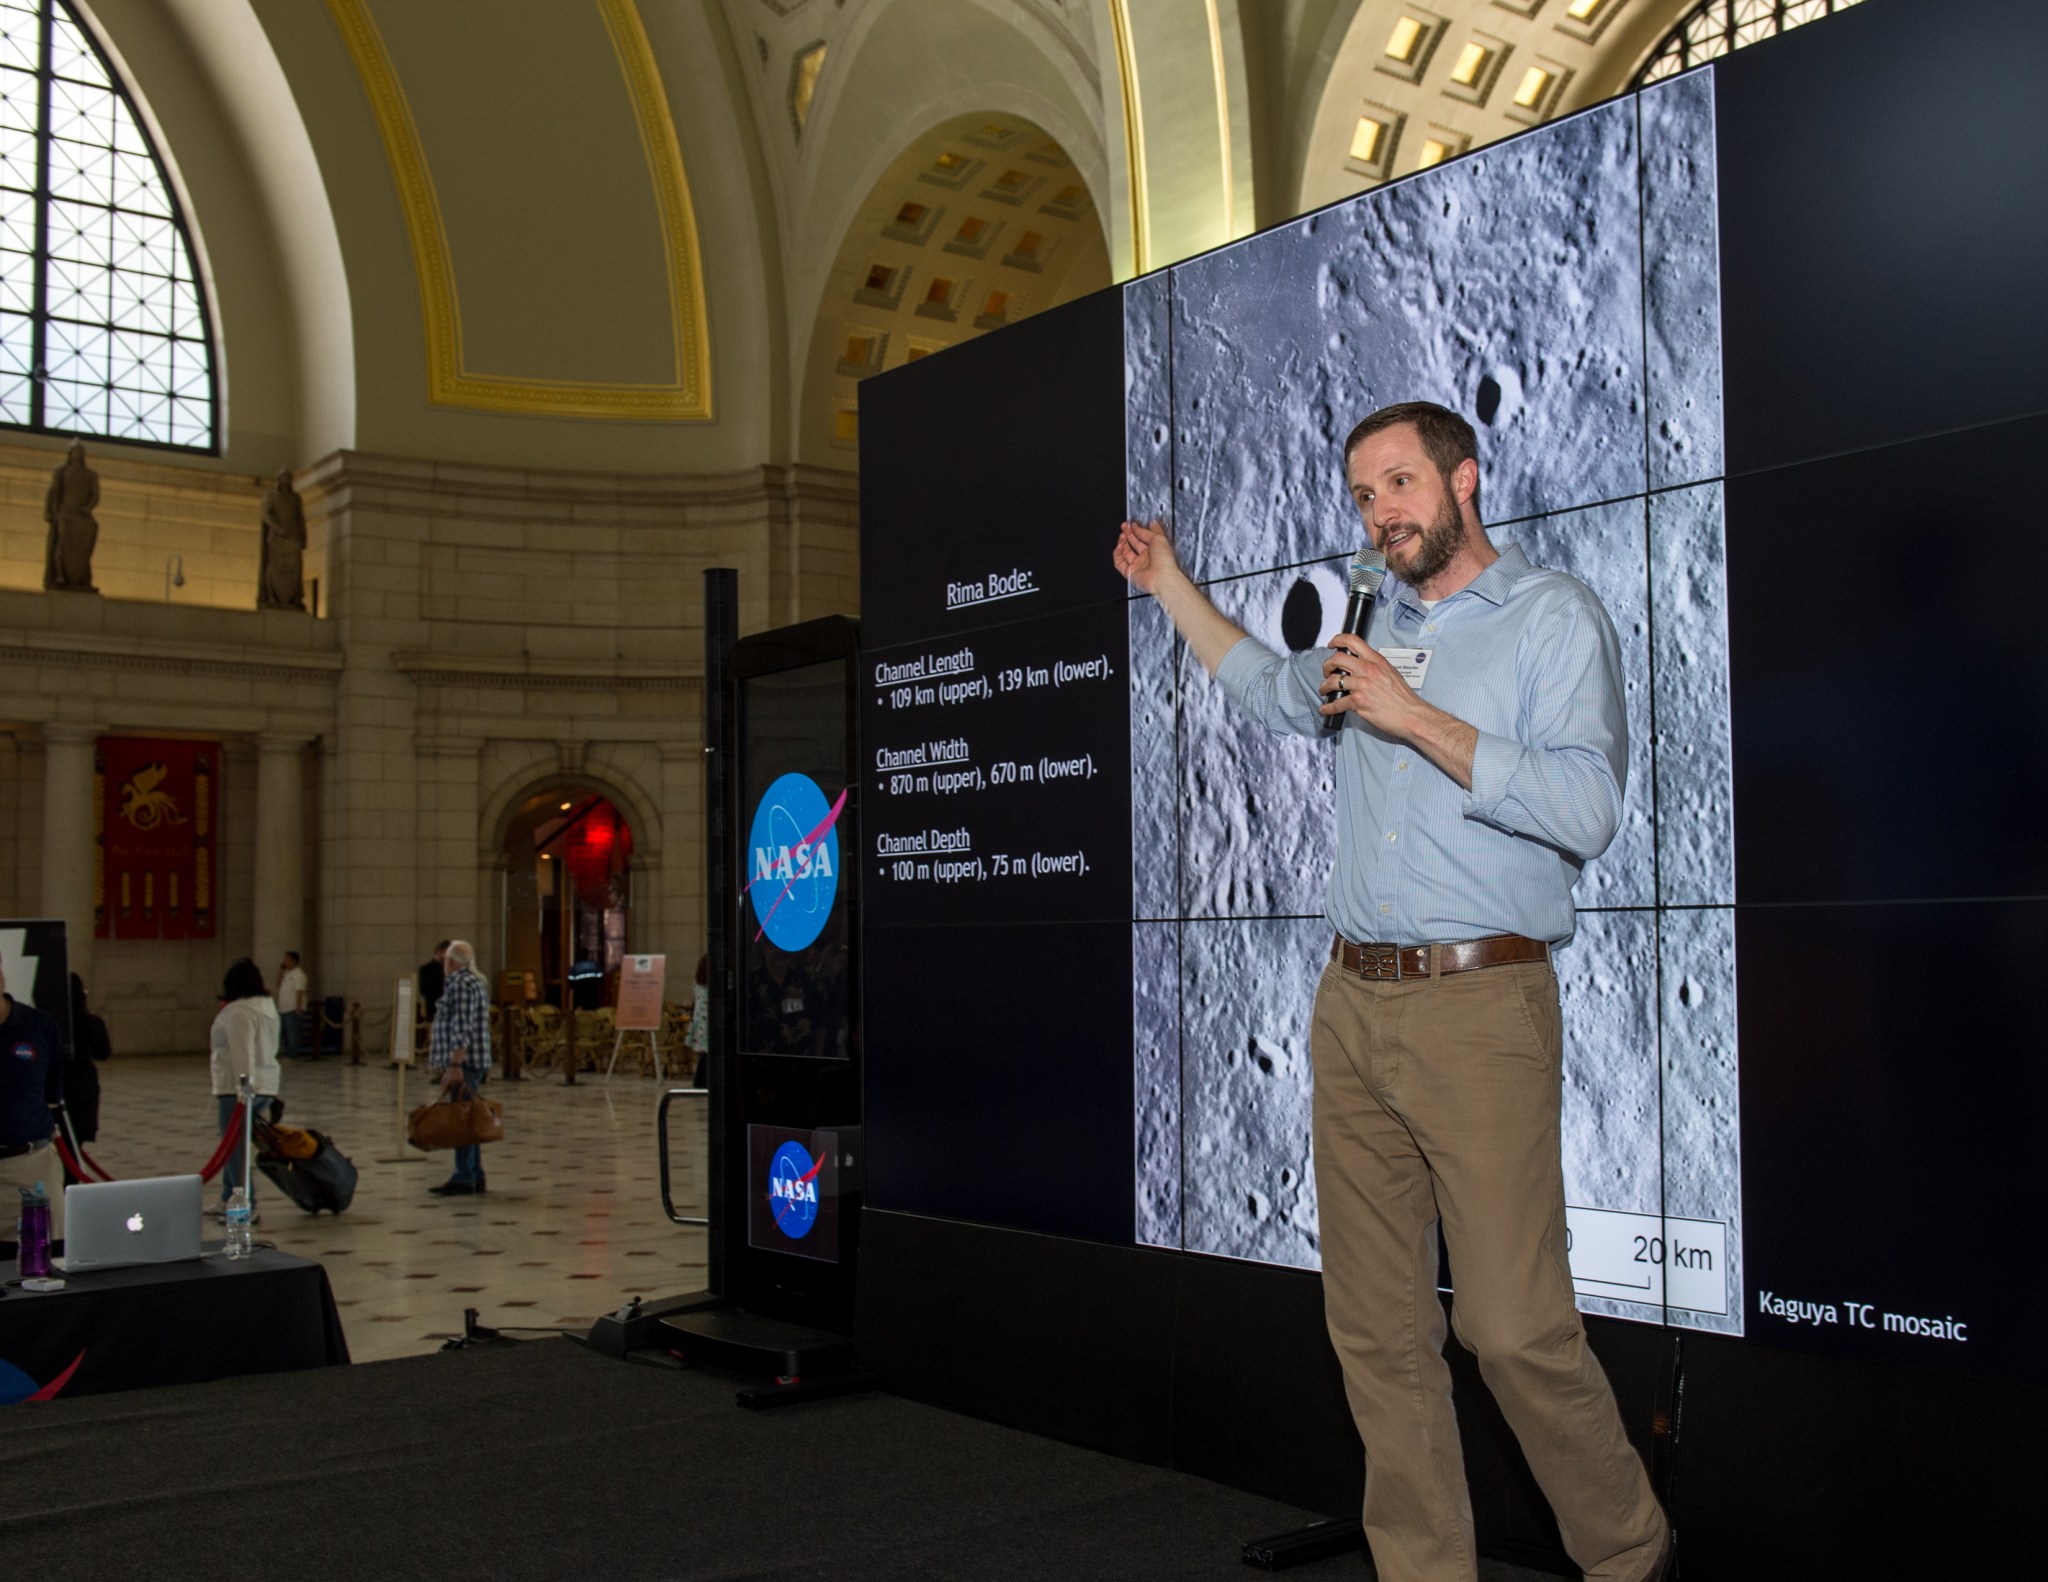 Bleacher presenting at a NASA earth day event at Union Station.